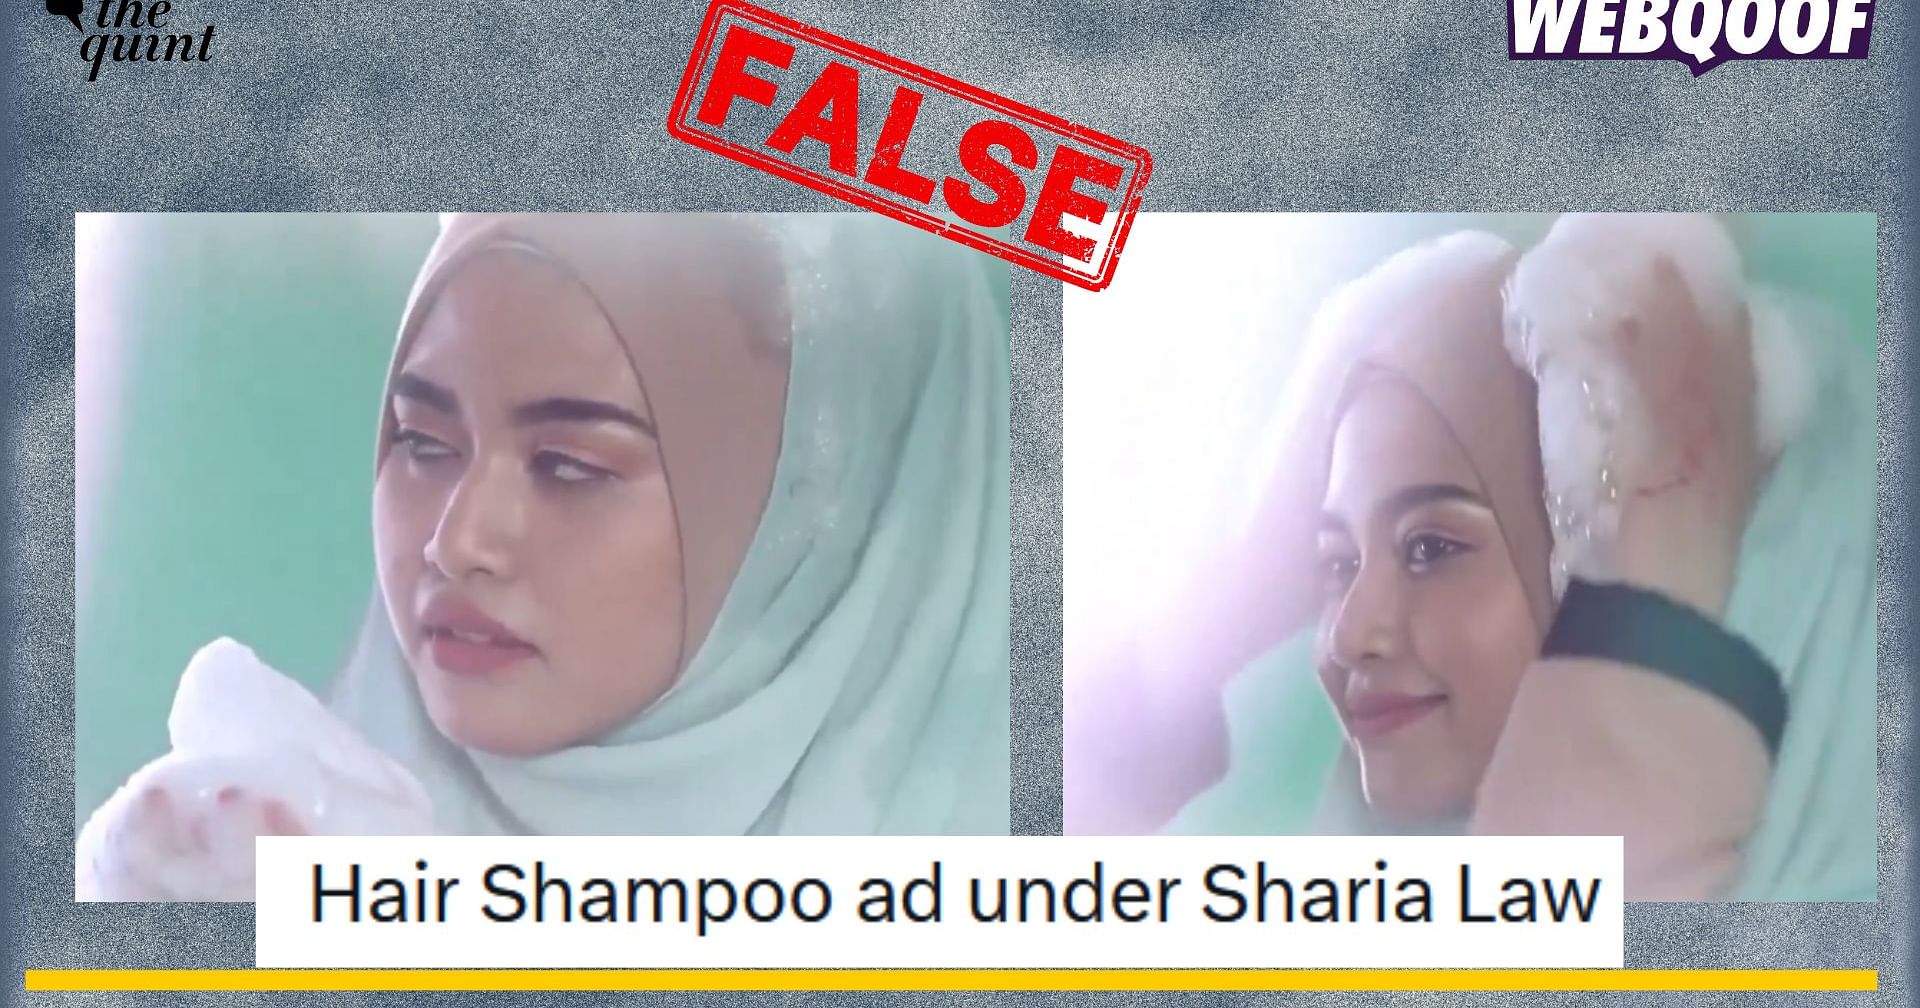 check | Parody Ad Video of Head Scarf From Malaysia Goes Viral as Shampoo Ad For Muslims